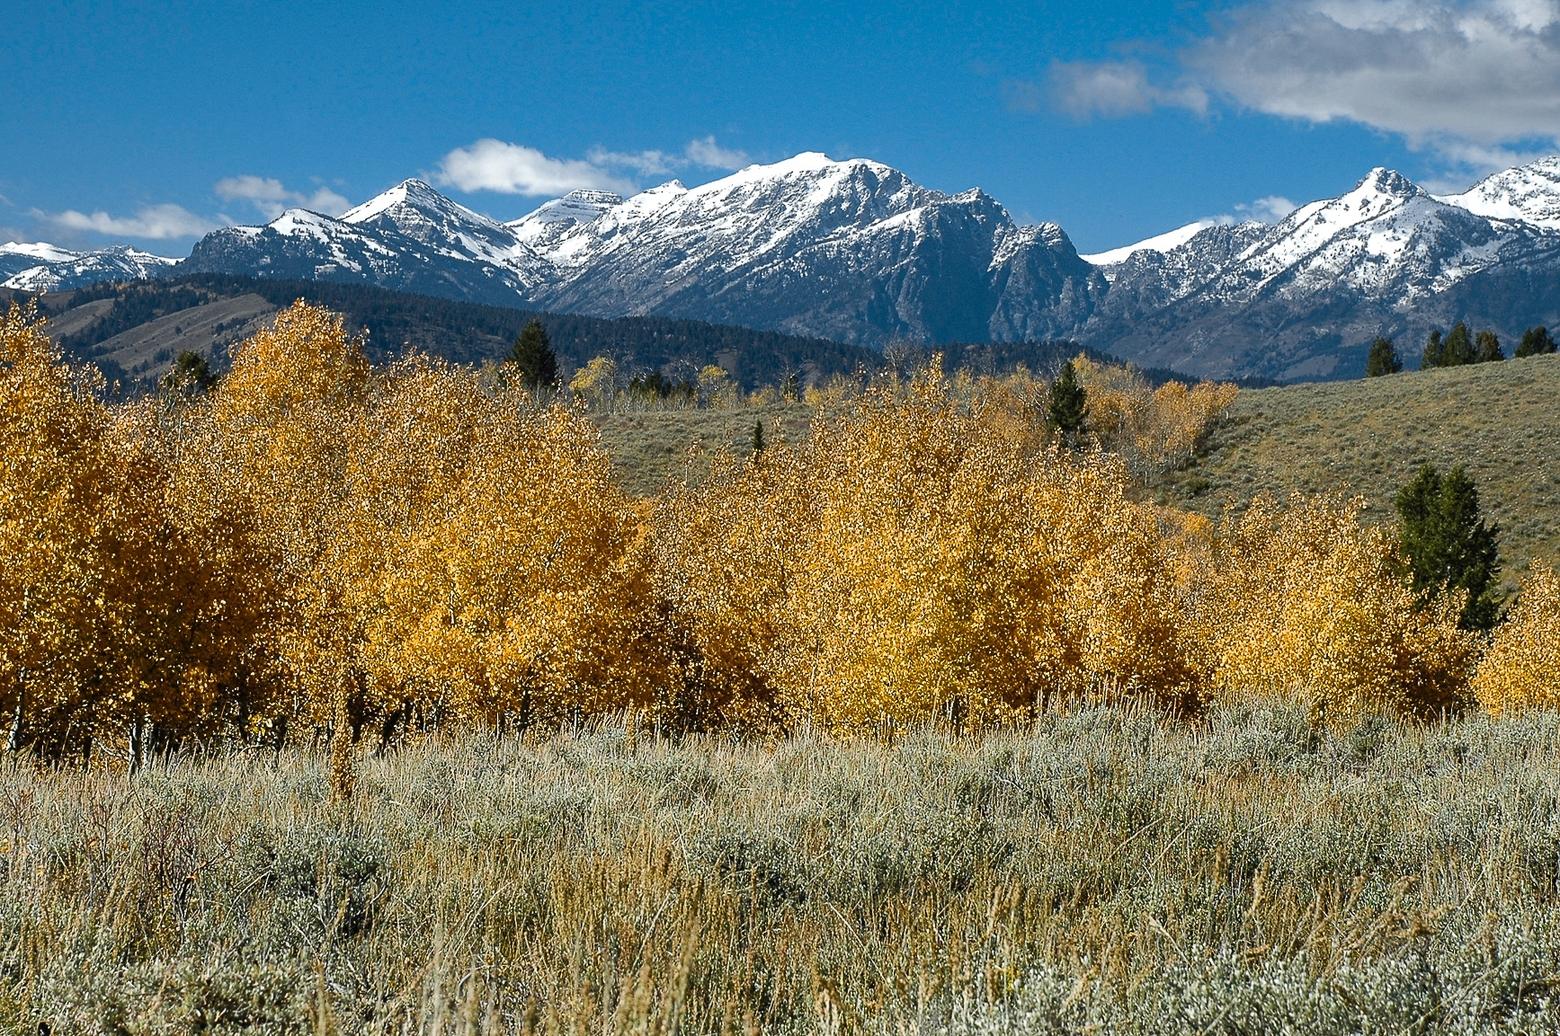 The views from the Kelly parcel in Teton County are remarkable, this to the southwest. It is a haven for wildlife, from ungulates to sage grouse to songbirds, and part of a major elk migration corridor in the Gros Ventre River watershed. Photo by Susan Marsh